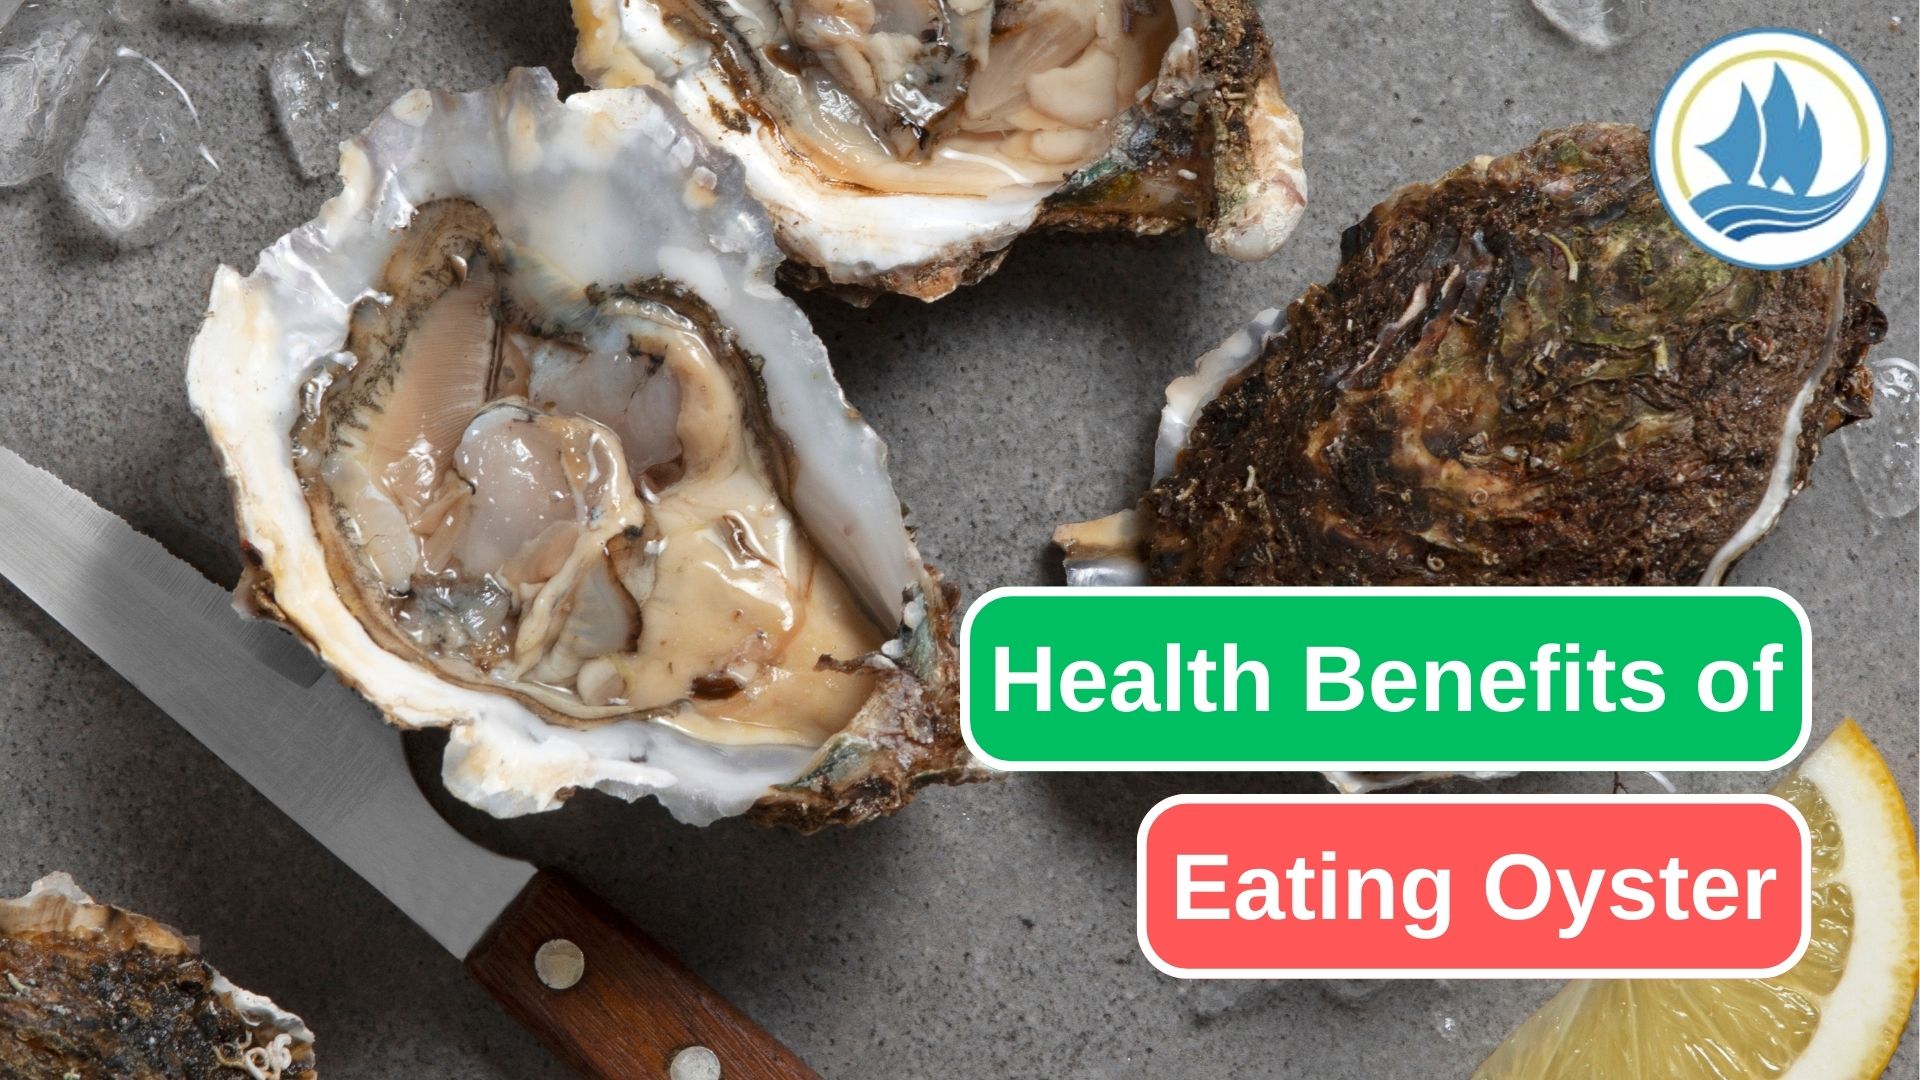 The 10 Best Benefits of Eating Oyster